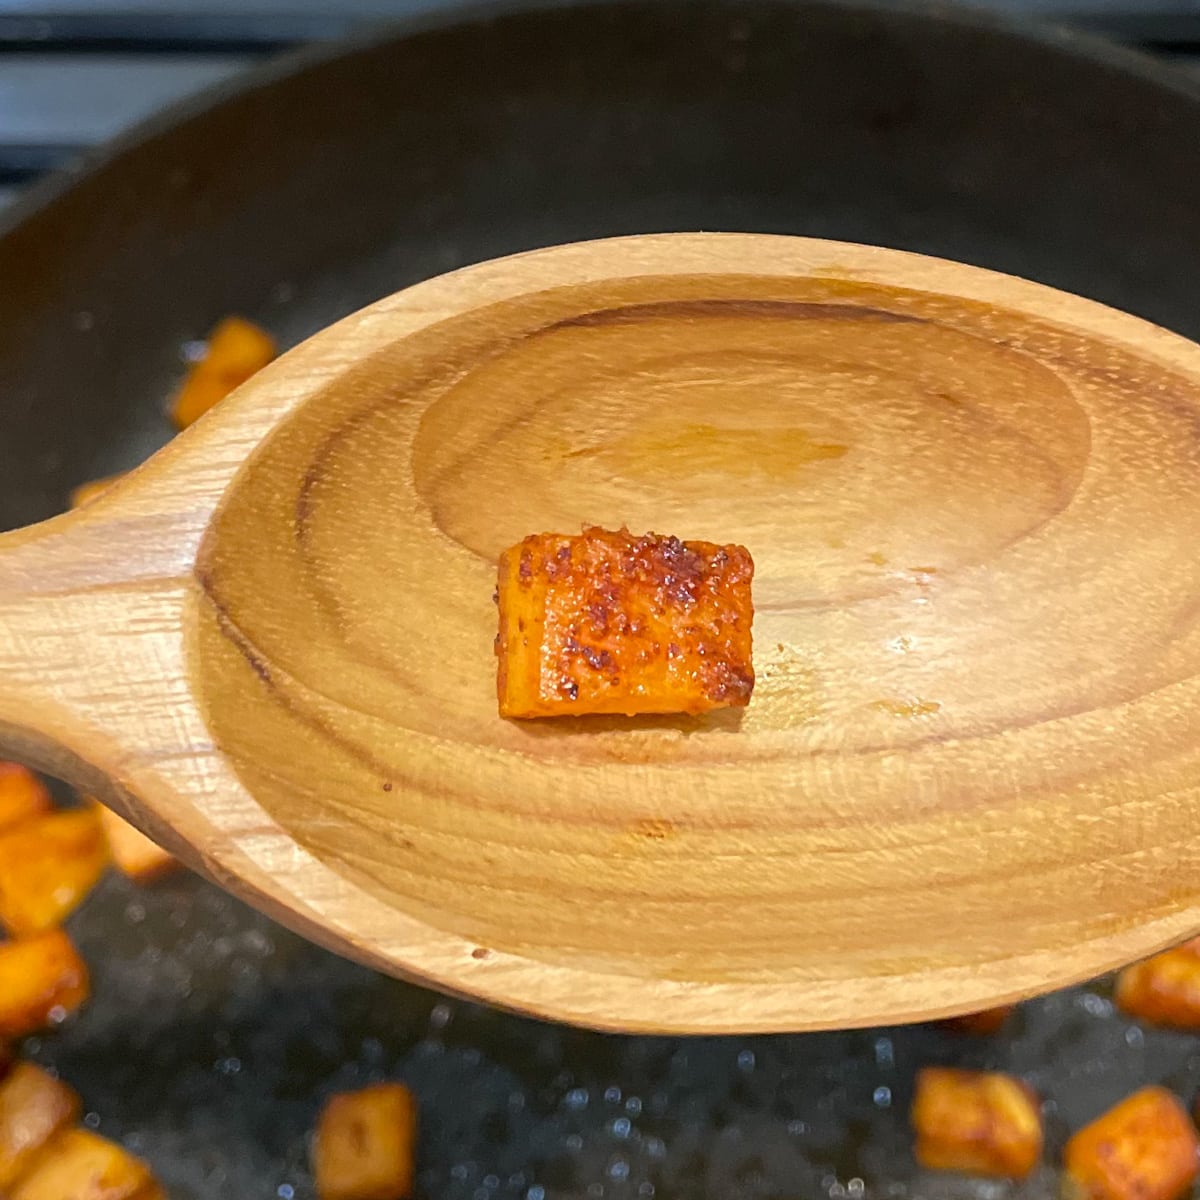 A wooden spoon in the foreground shows a browned cube of sweet potato over a black frying pan with sweet potato cubes cooking in it.